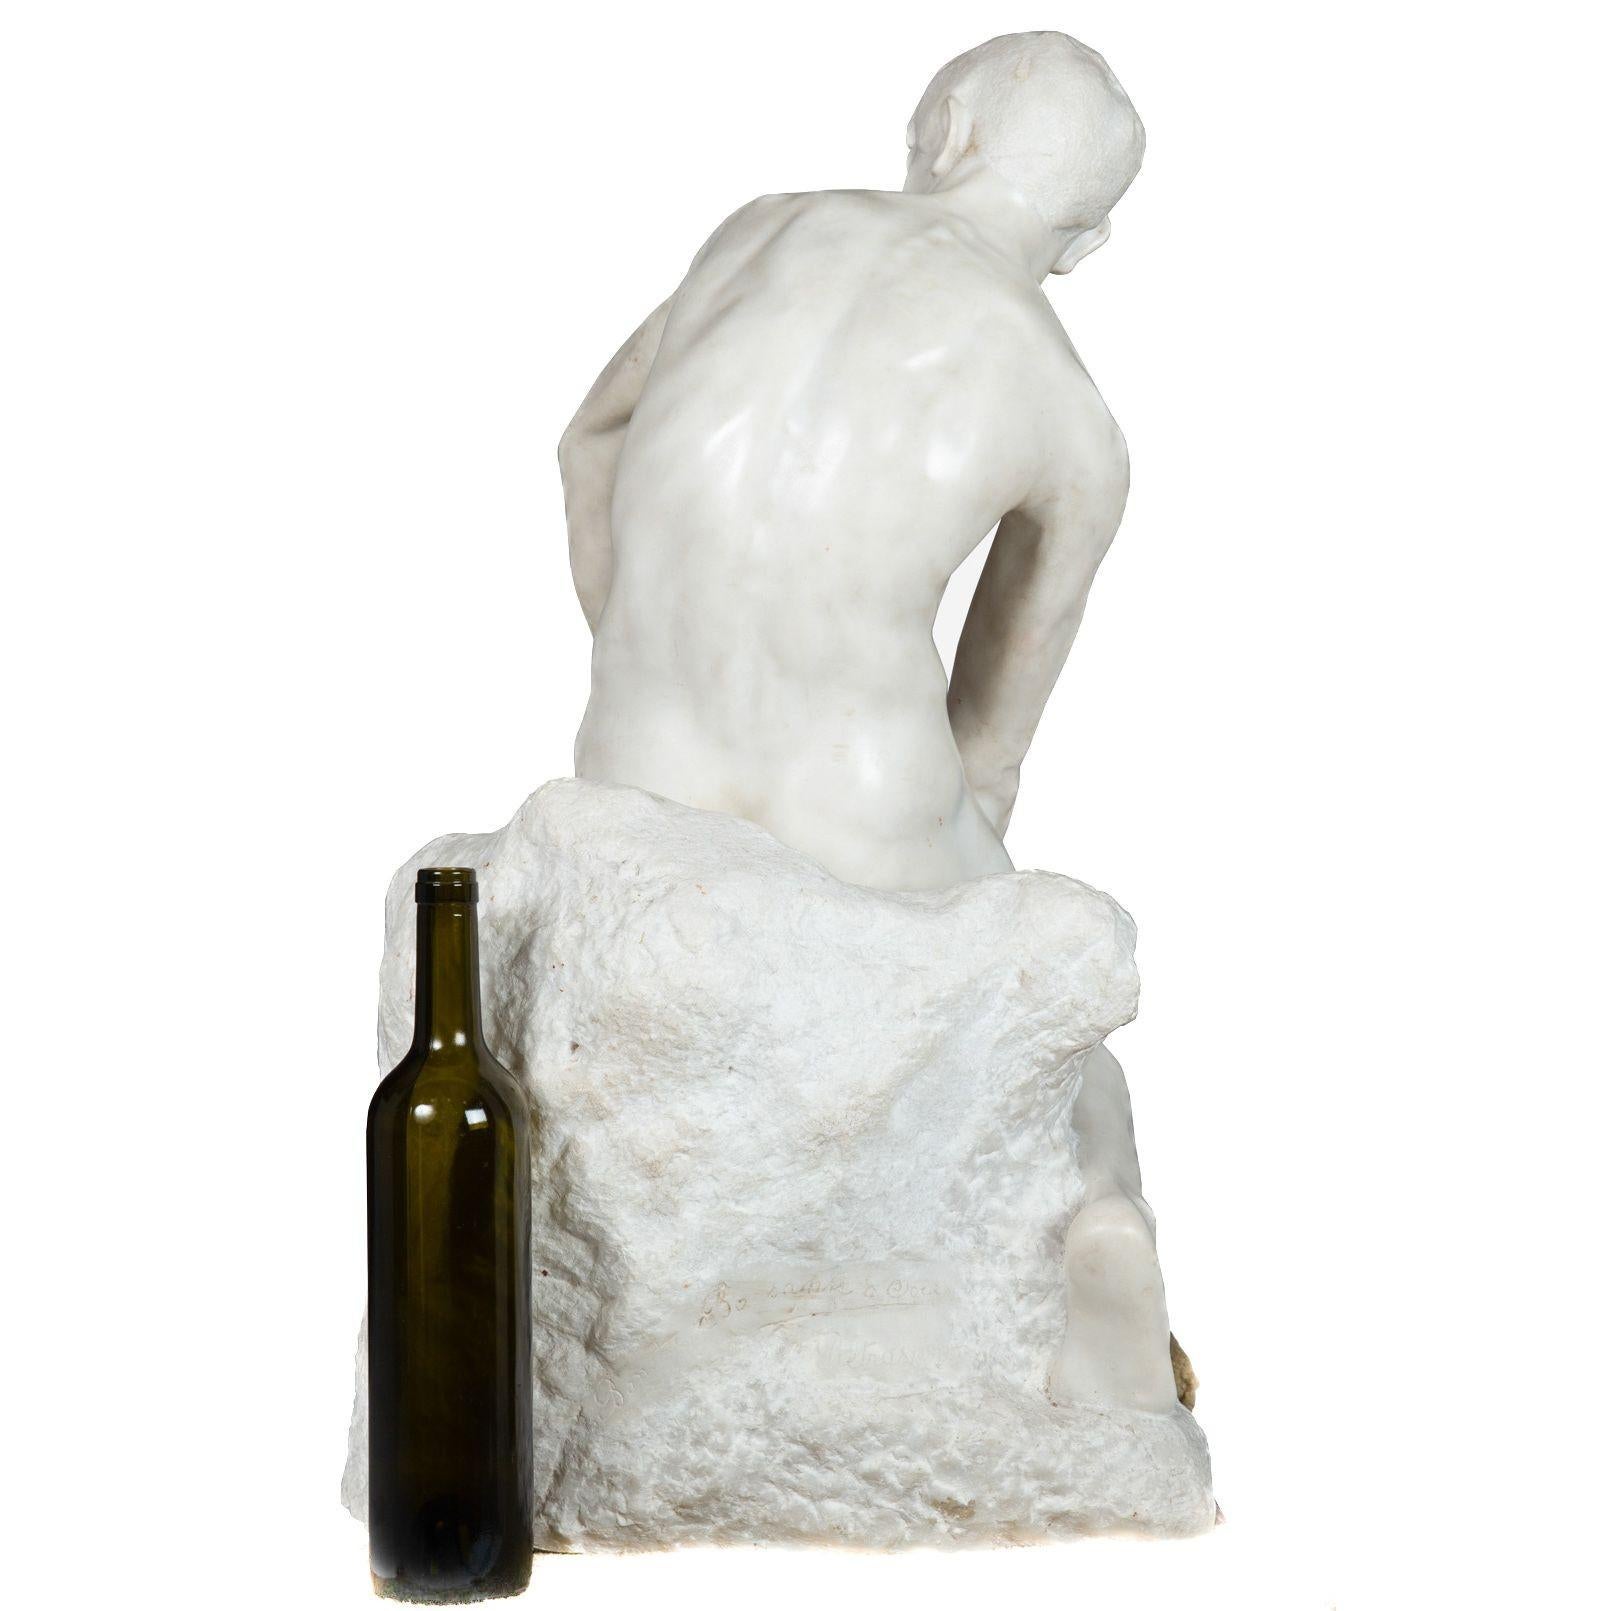 20th Century Italian Carved Carrara Marble Art Deco Sculpture of “Stone Carver” by Barsanti For Sale